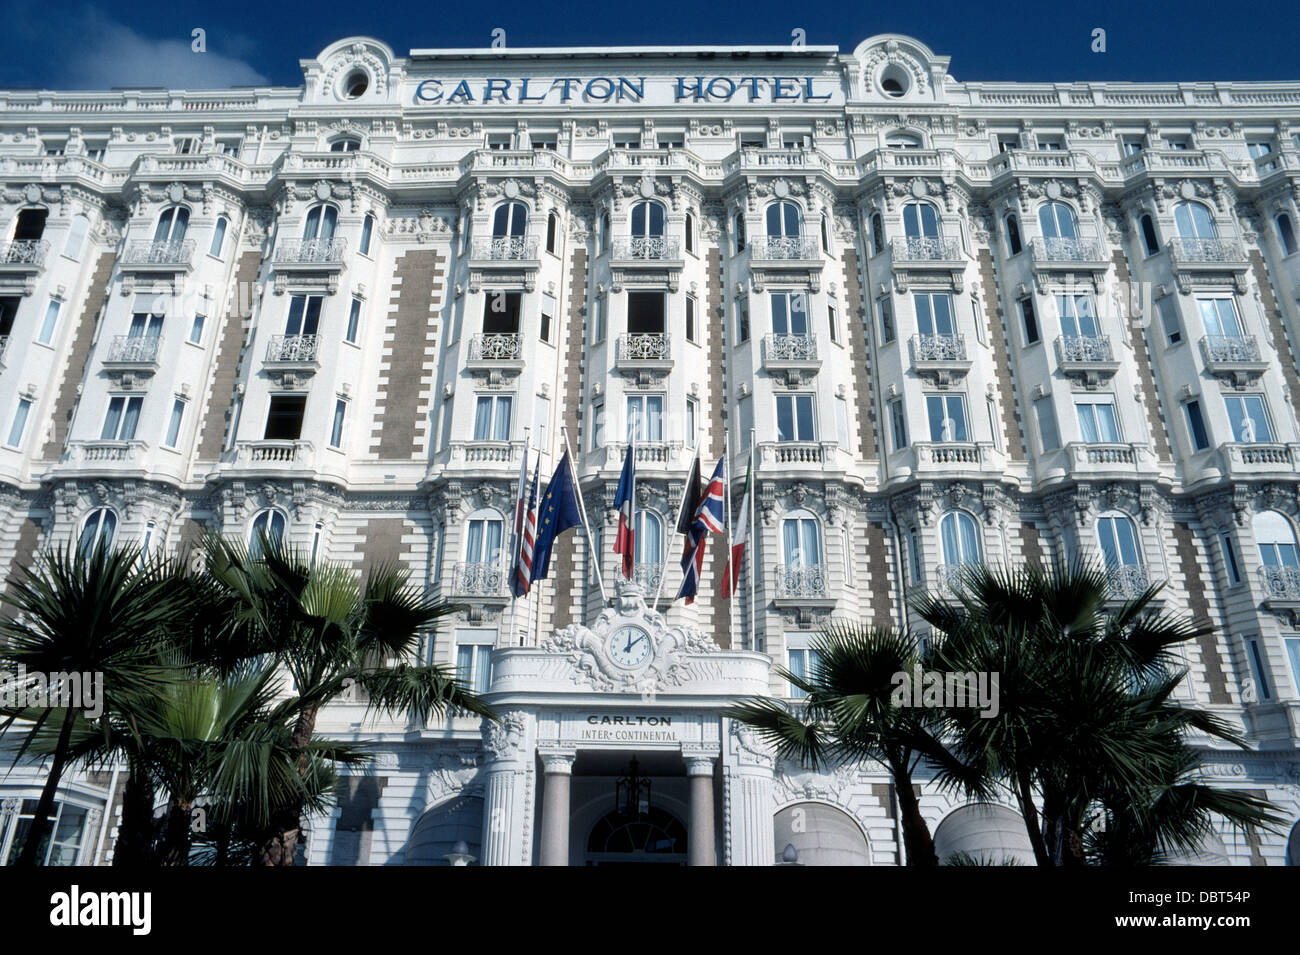 The famous and luxurious art-deco InterContinental Carlton Hotel on the French Riviera in Cannes, France, celebrated its 100th anniversary in 2013. Stock Photo